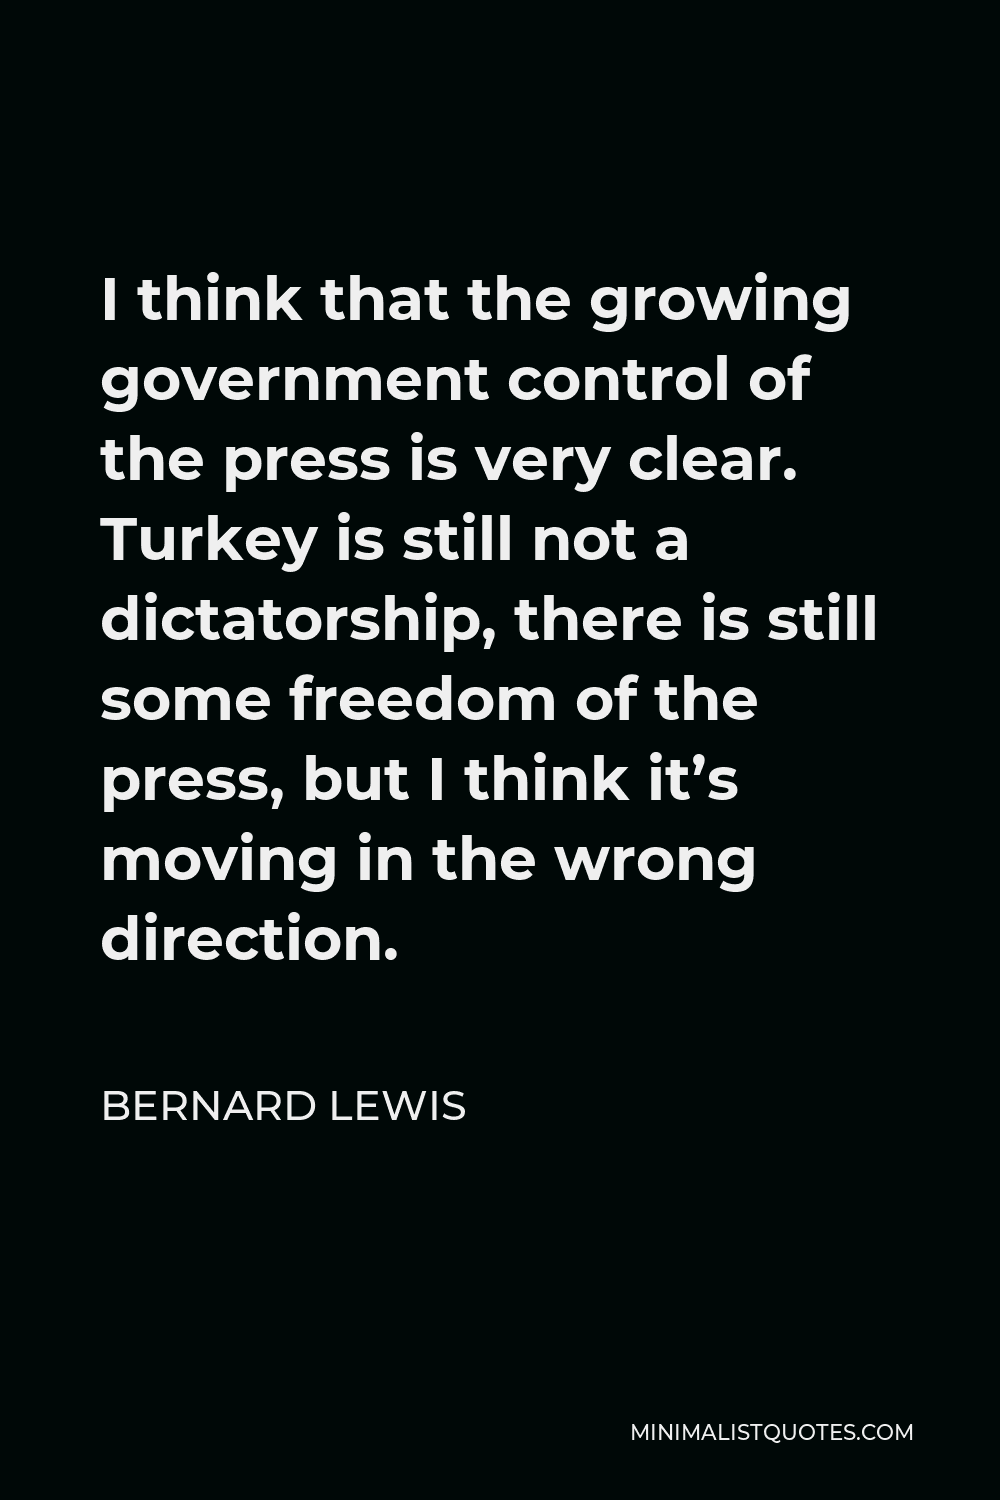 Bernard Lewis Quote - I think that the growing government control of the press is very clear. Turkey is still not a dictatorship, there is still some freedom of the press, but I think it’s moving in the wrong direction.